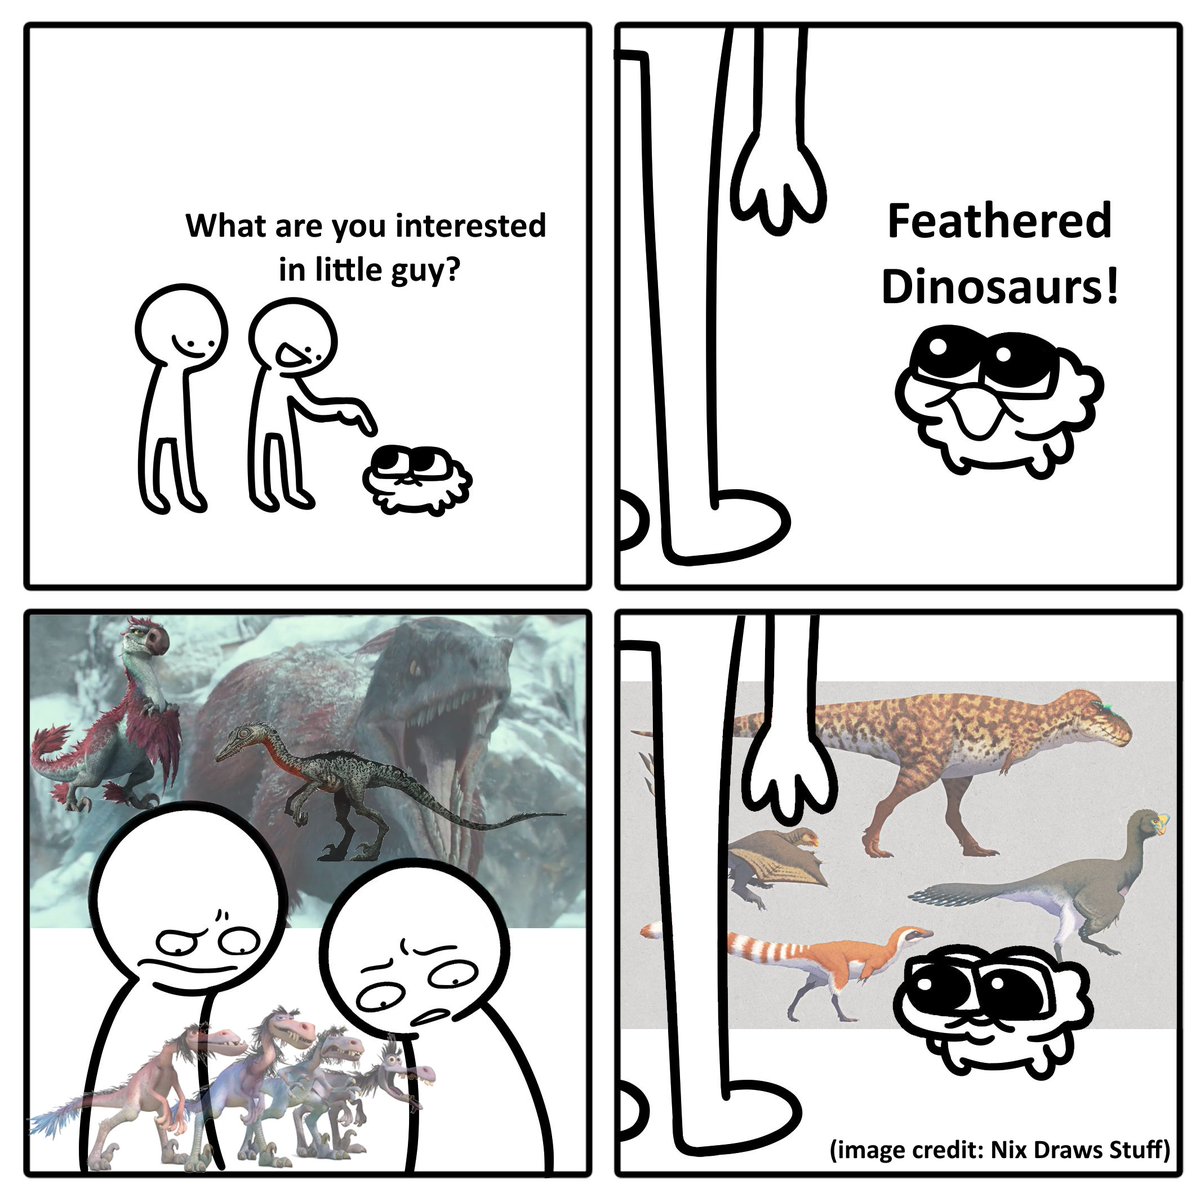 This is why we keep going on about good feathered dinosaur representation in media